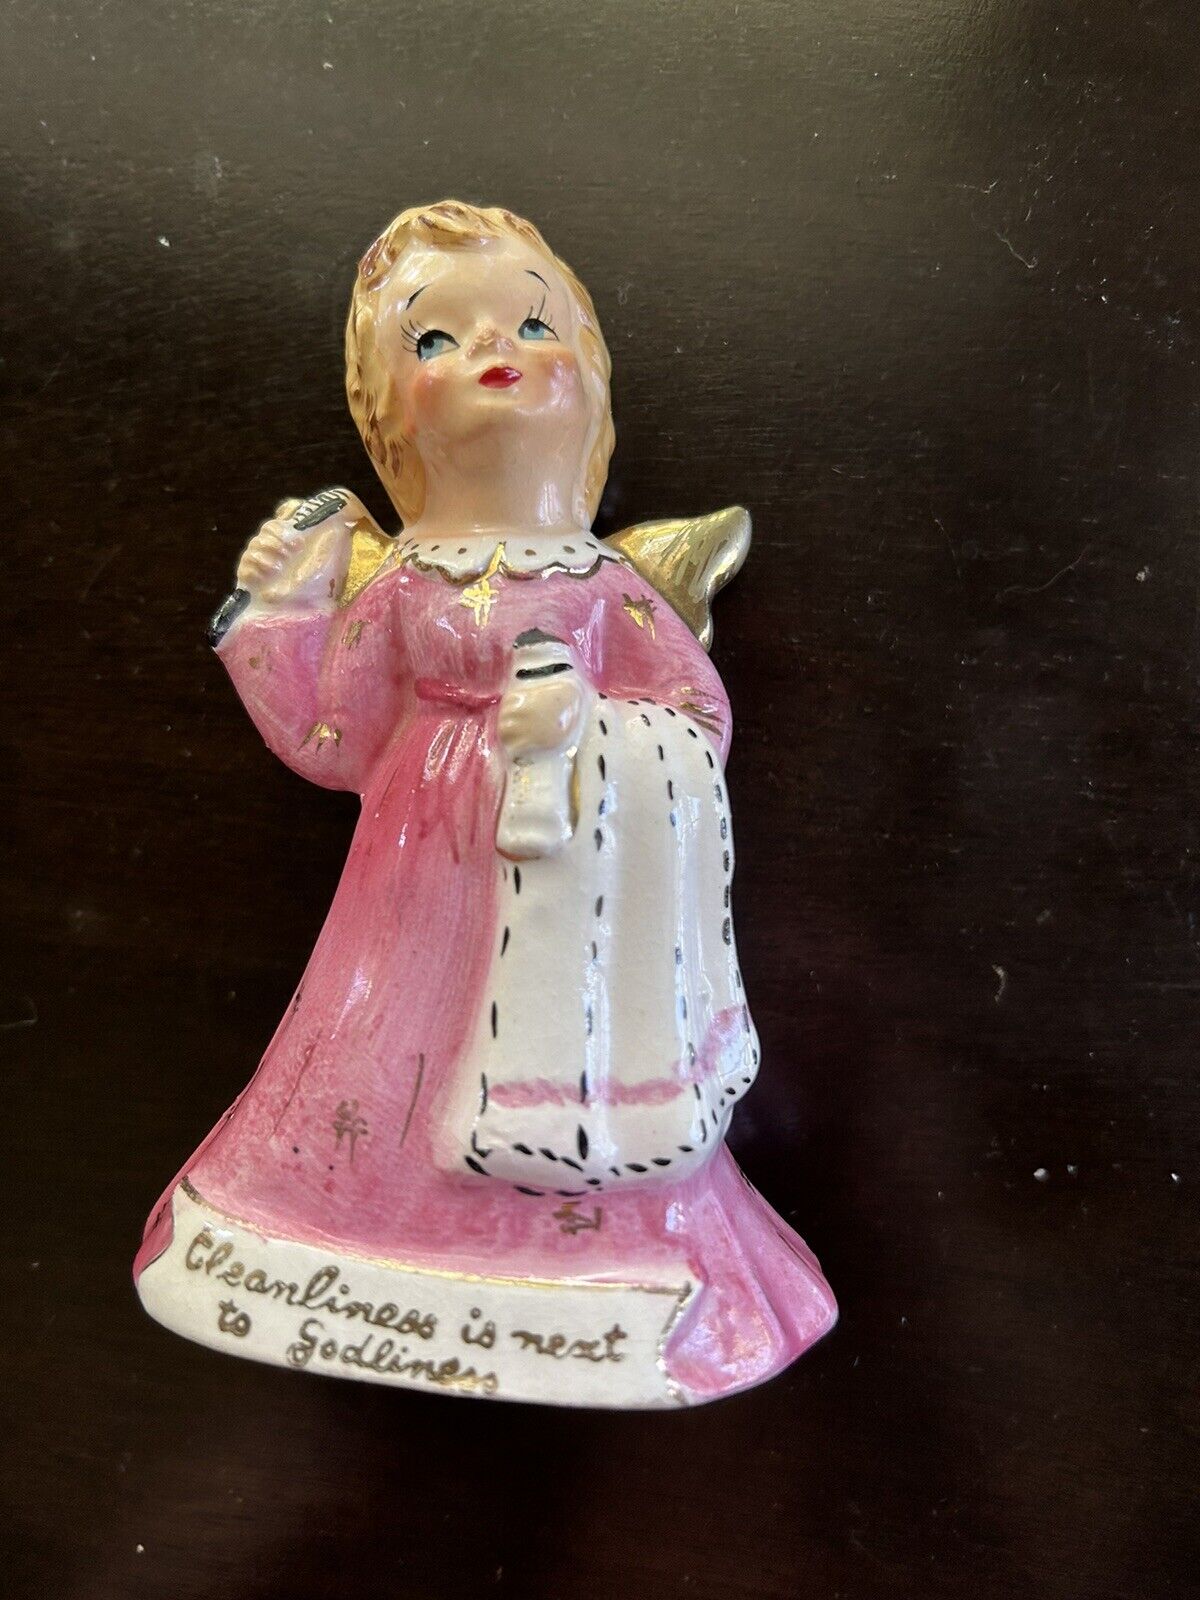 Vintage Yona Shafford Angel Figure Figurine  - Cleanliness Is Next To Godliness-